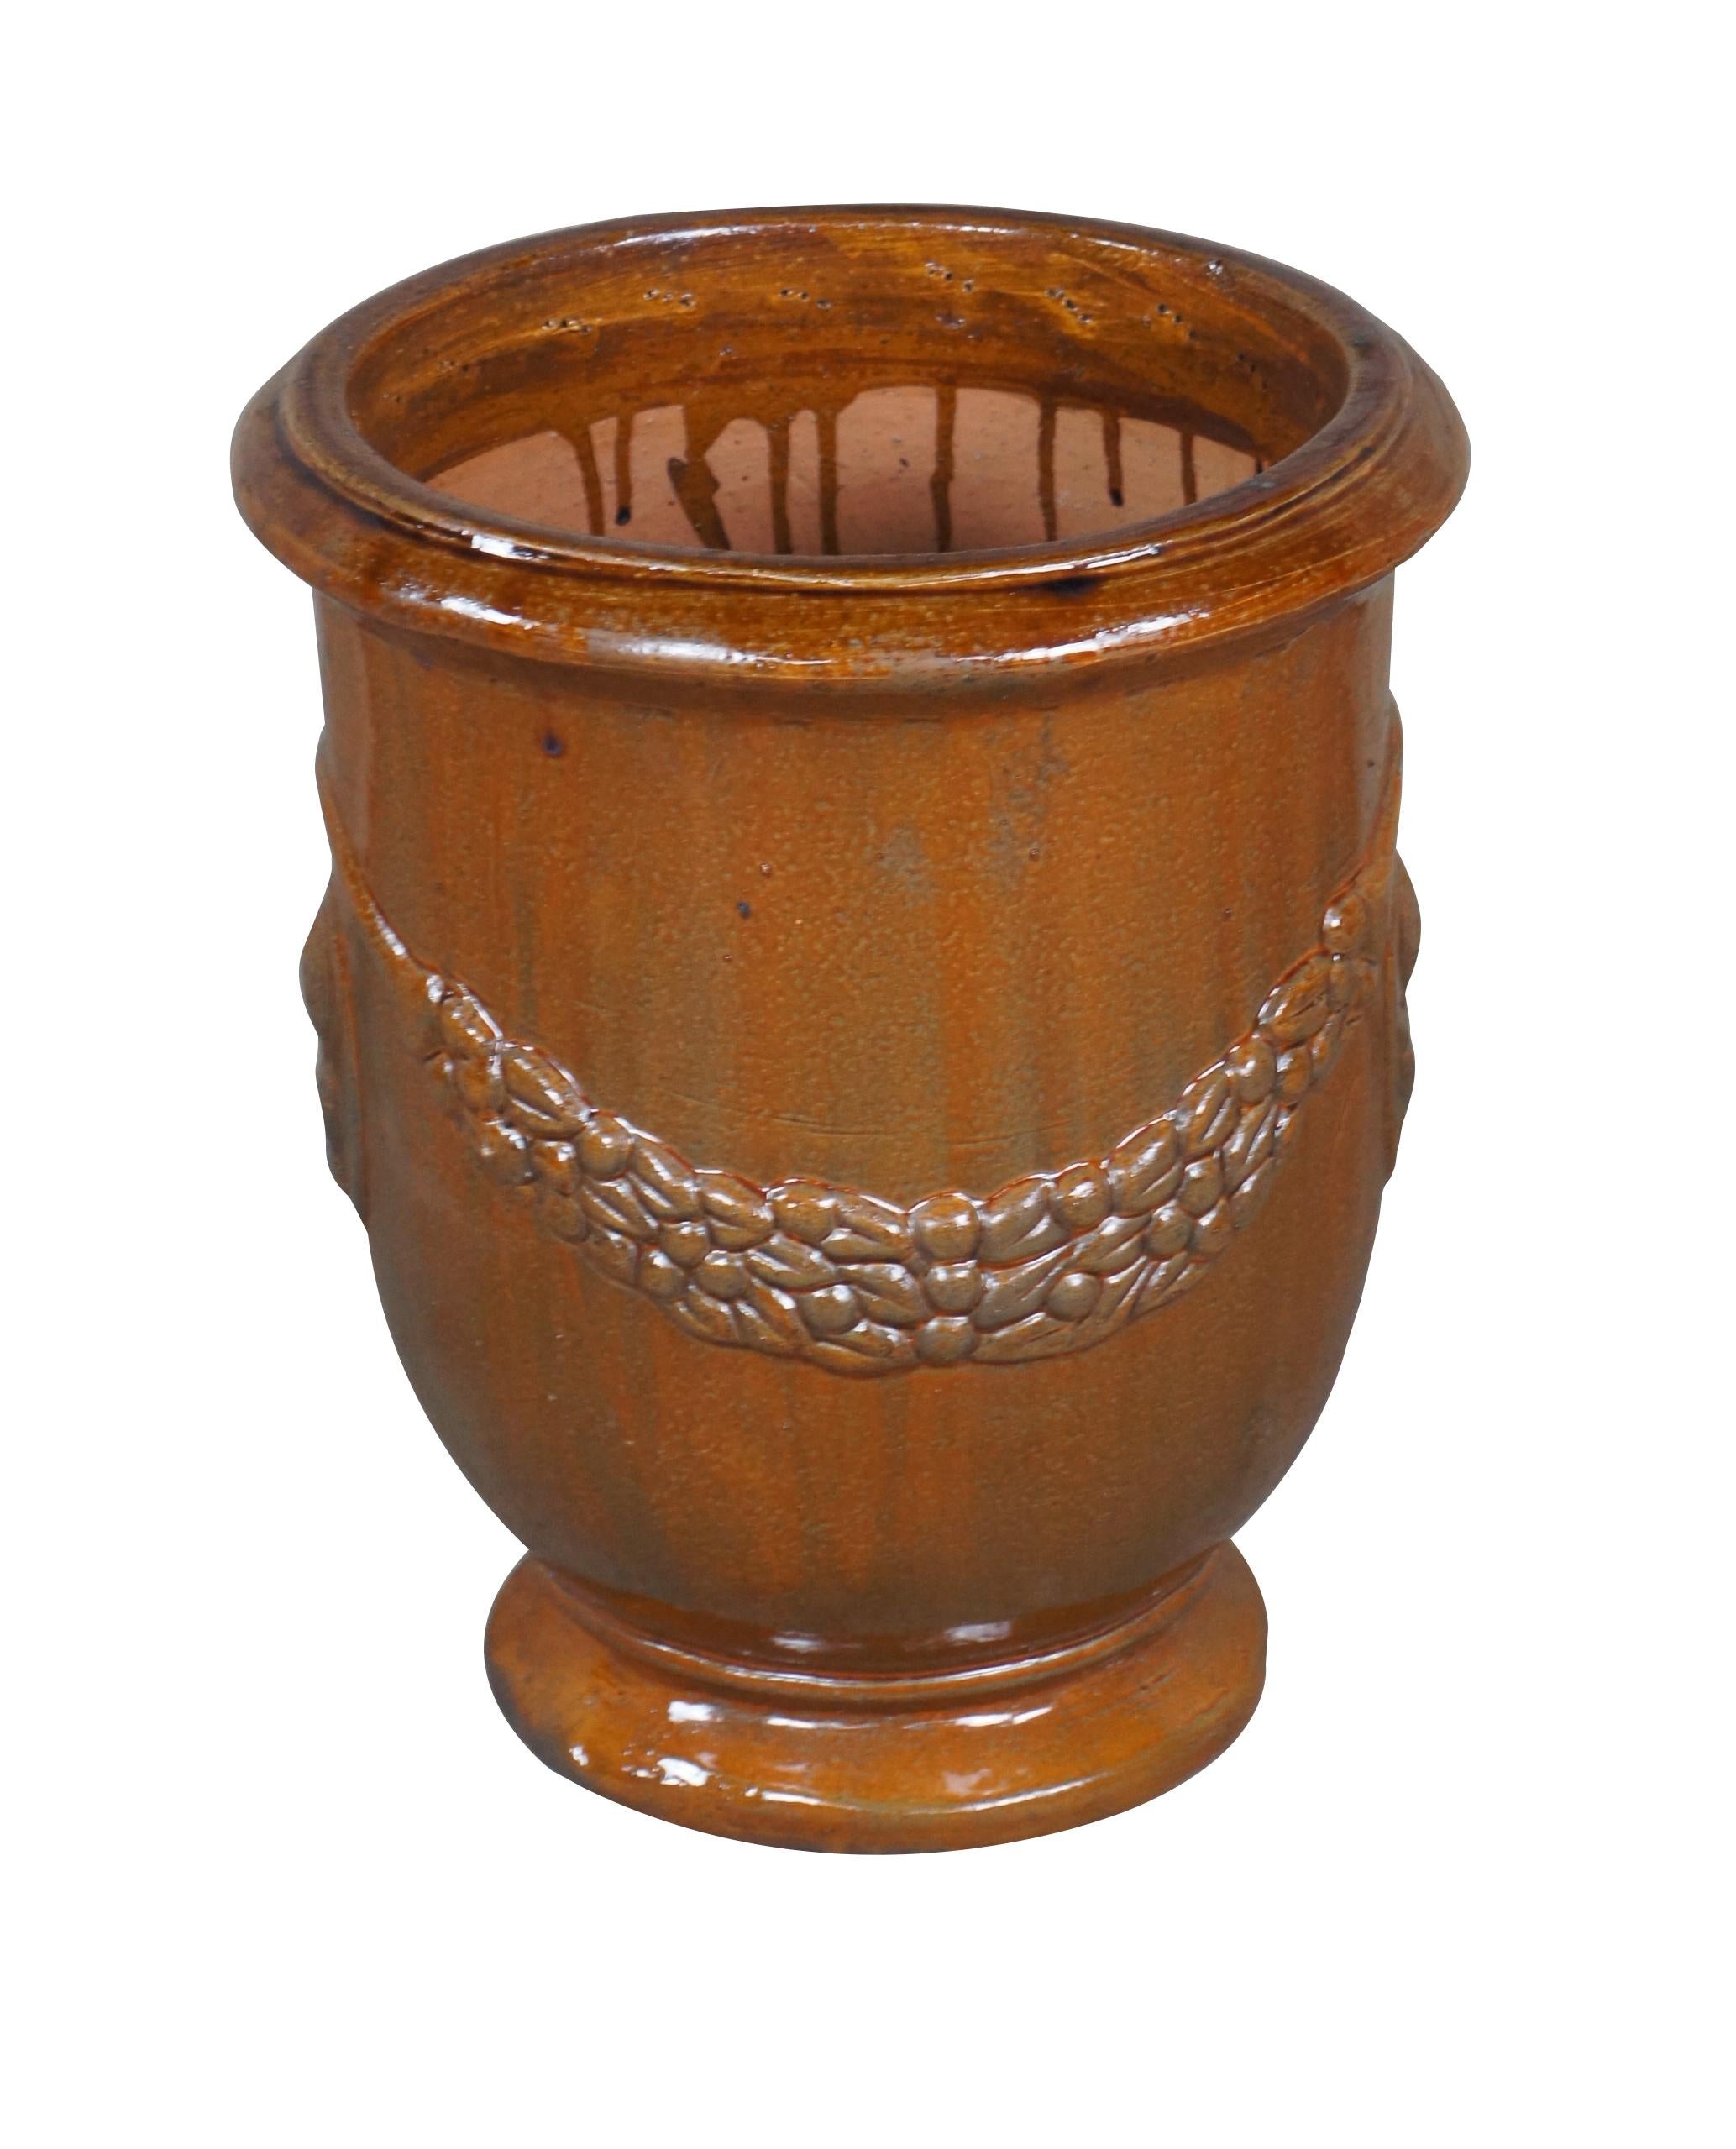 A lovely French clay fired pot in brown glaze with wreath detail and medallion along each side. The raised medallion features a bush in a pot.   The beautiful glaze has varying shades of brown.  Drip hole at the center of base.

Dimensions:
14